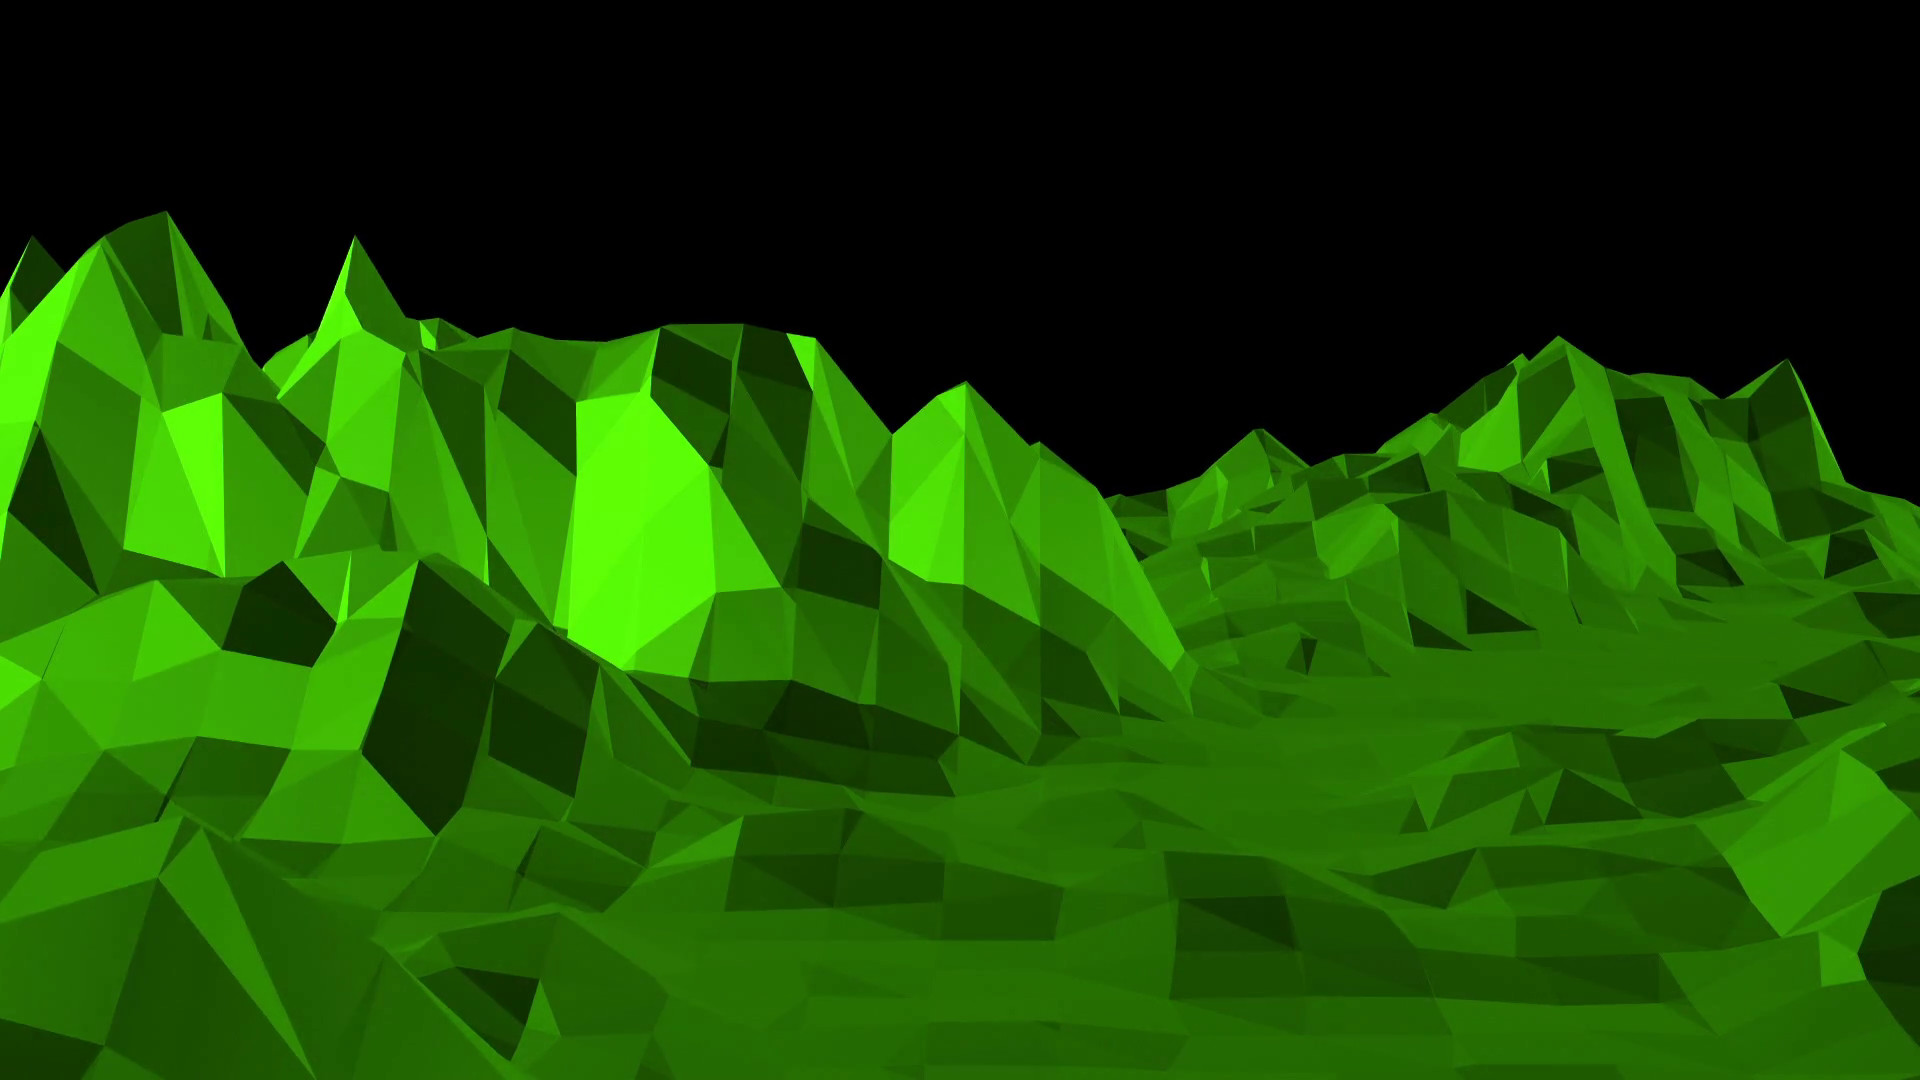 1920x1080 Green low poly background pulsating. Abstract low poly surface as glamour  landscape in stylish low